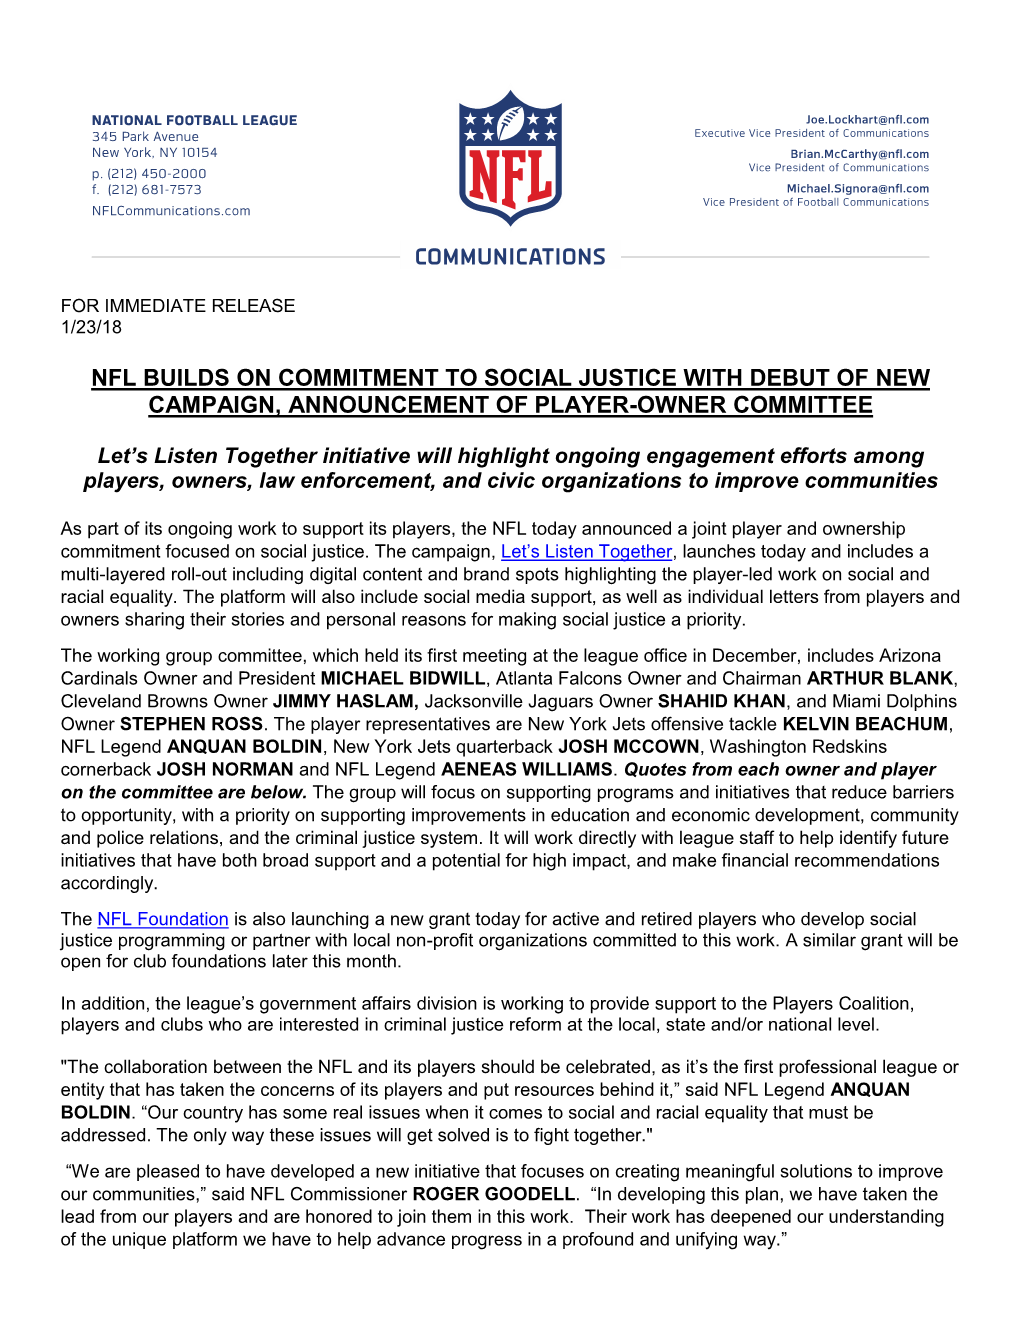 Nfl Builds on Commitment to Social Justice with Debut of New Campaign, Announcement of Player-Owner Committee